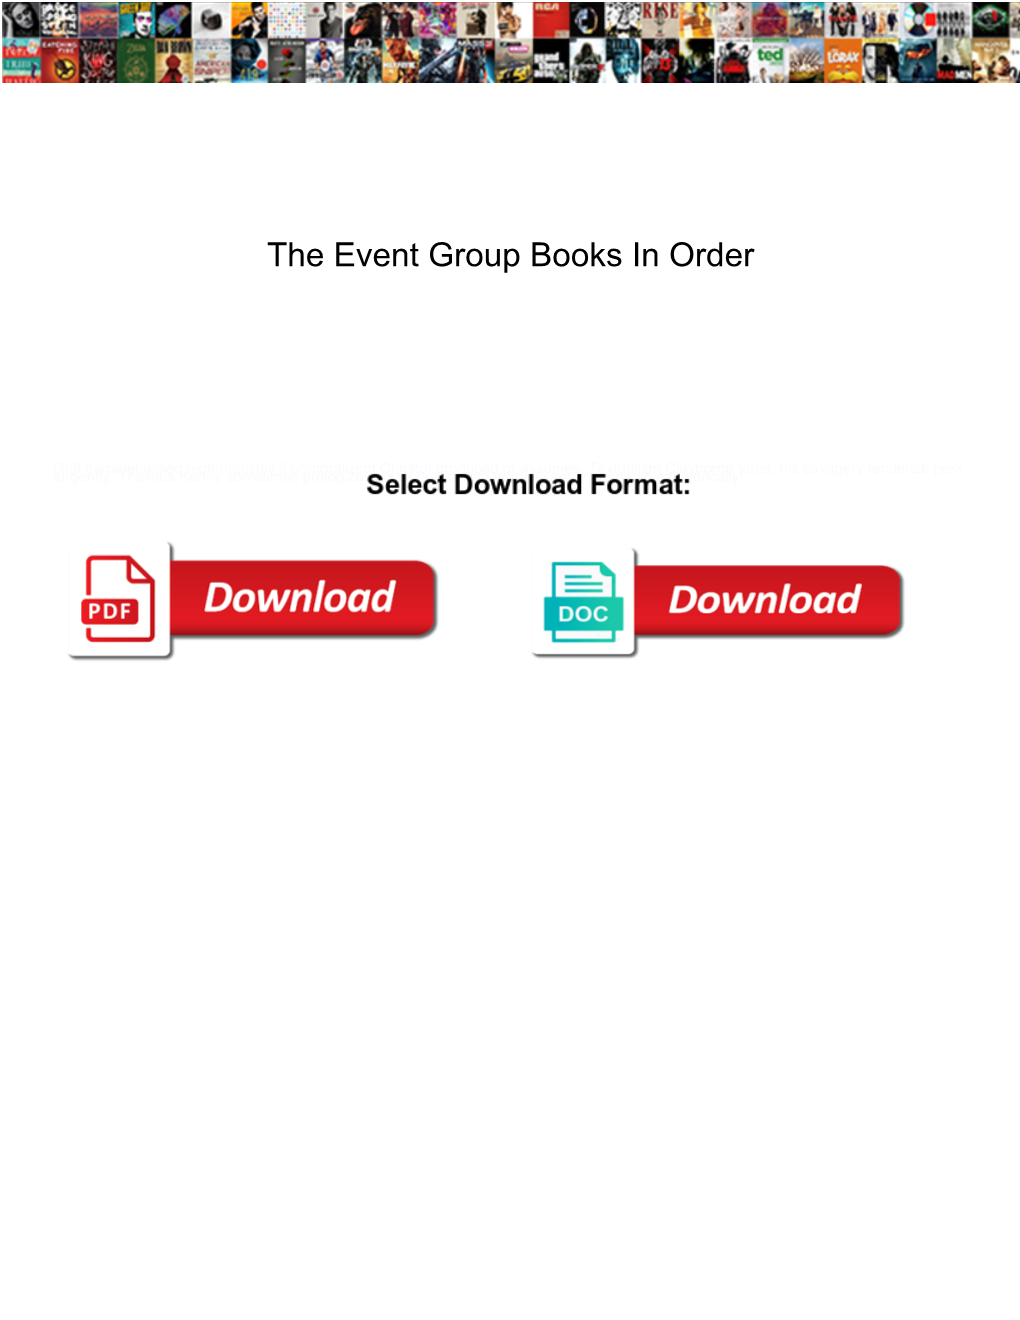 The Event Group Books in Order